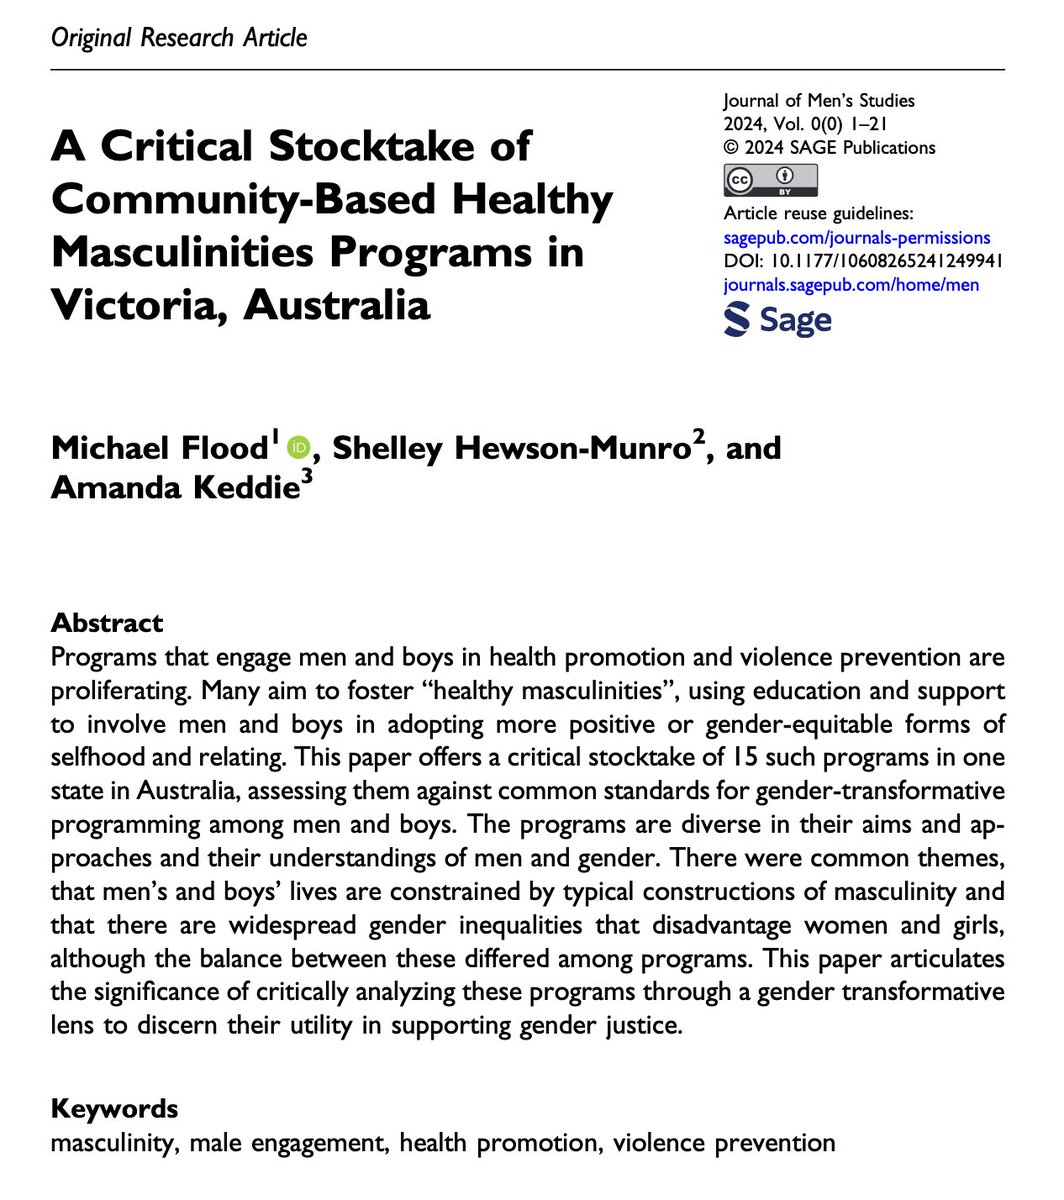 Healthy masculinities programs among men and boys in Australia: What potential do they have to contribute to gender justice? This study involves a critical stocktake of programs in Victoria, holding them up against a gender-transformative standard Article: journals.sagepub.com/doi/10.1177/10…